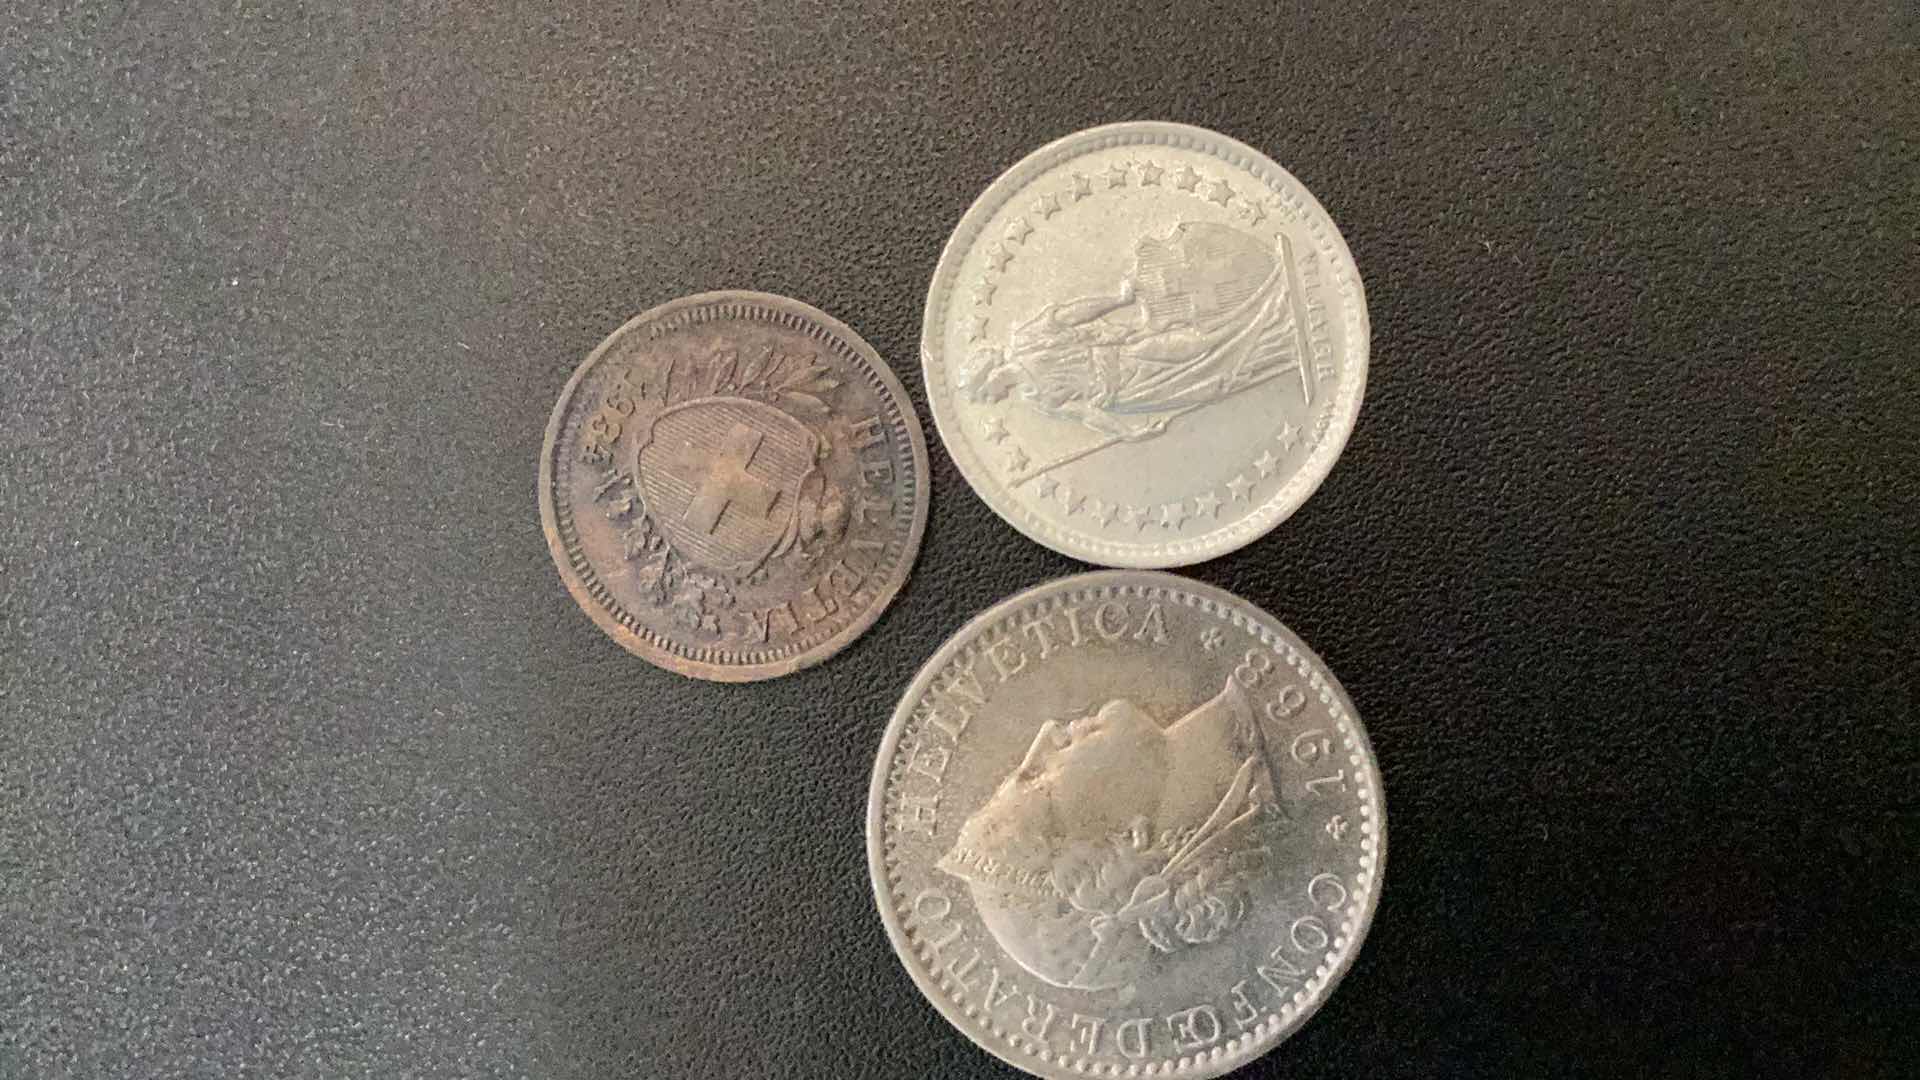 Photo 1 of 3 COLLECTIBLE COINS - SWITZERLAND 1934, 1959, 1968